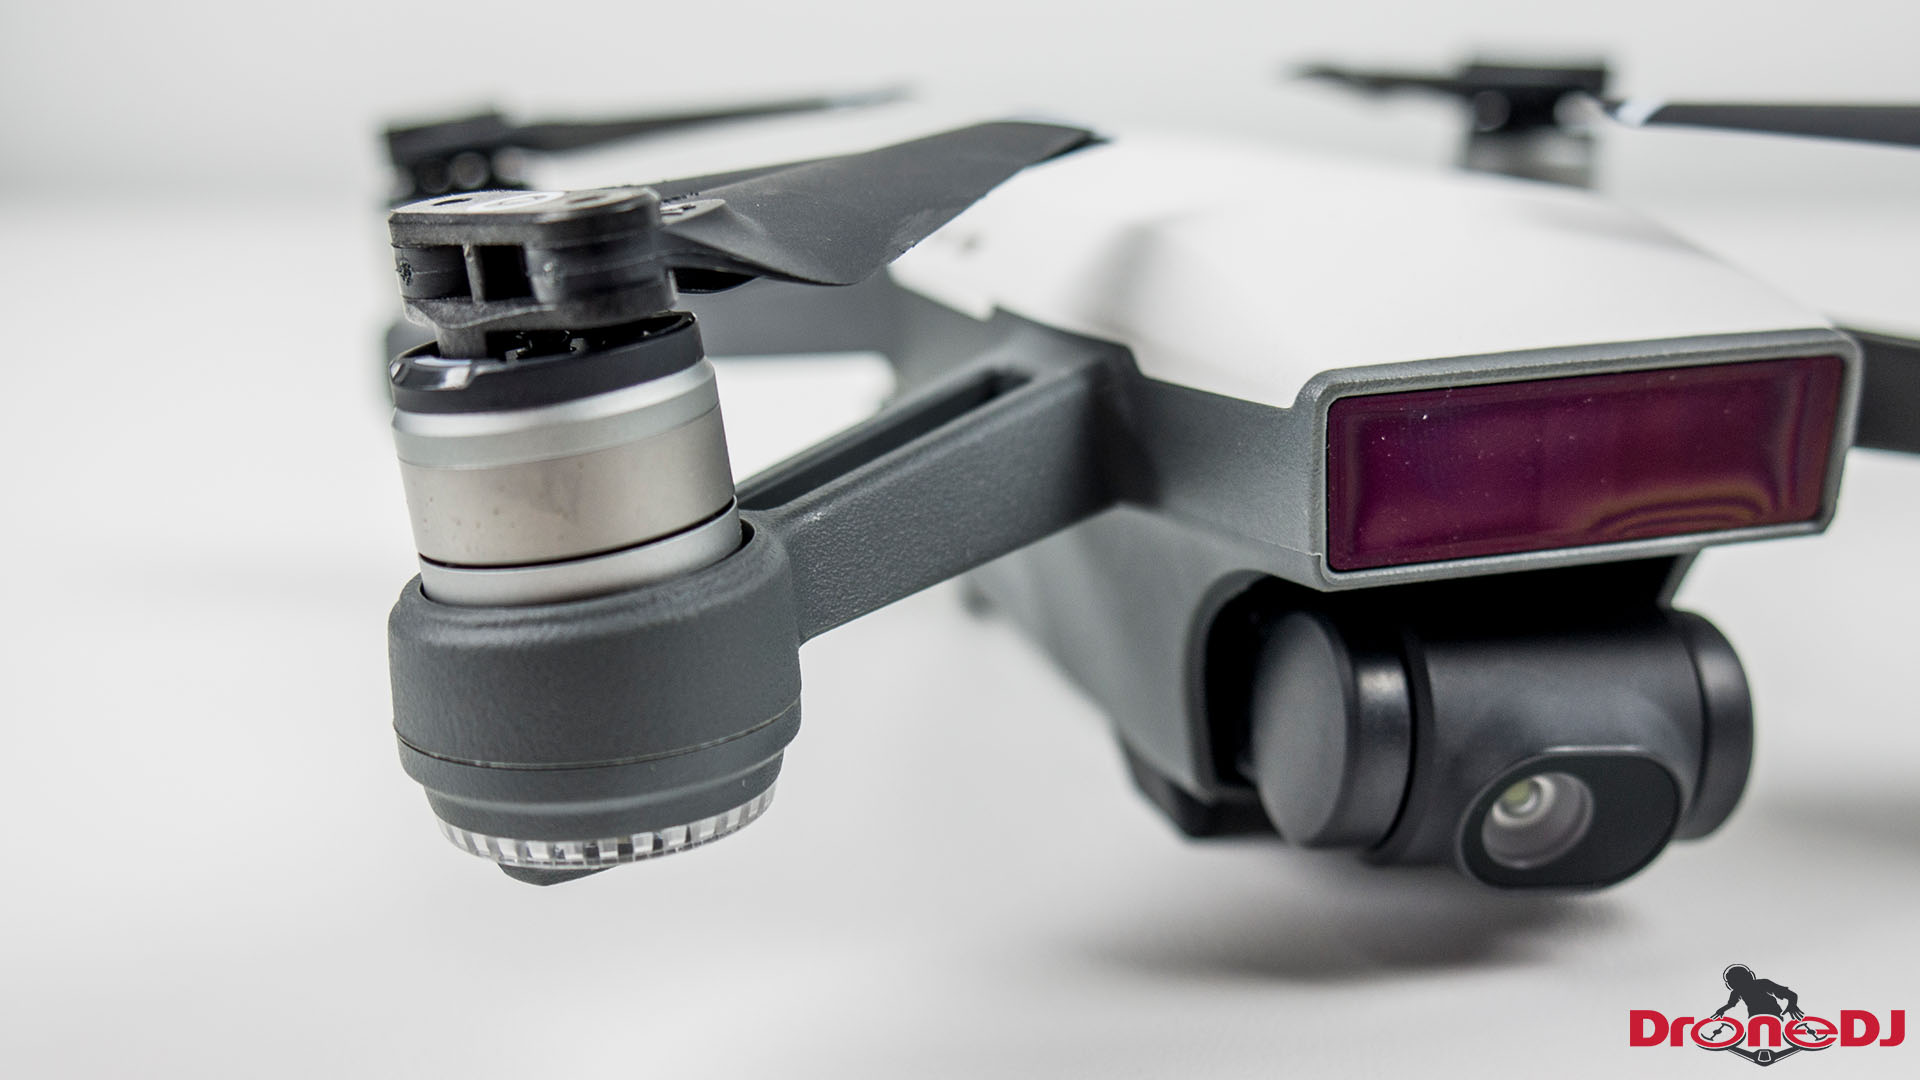 The DJI Spark is still the best beginner drone you can buy